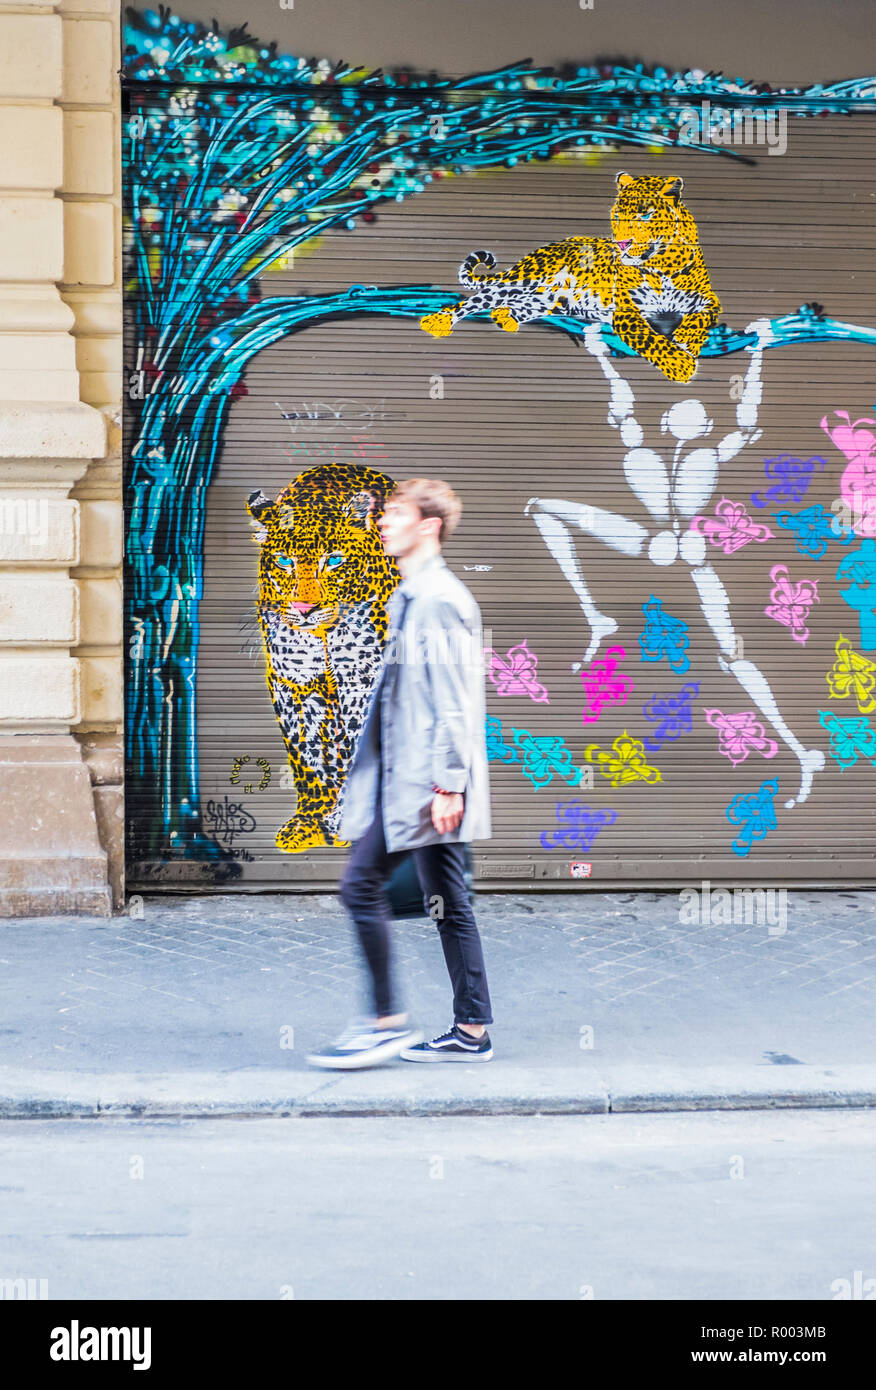 blurred image of young man against grafitti style painted metal door Stock Photo